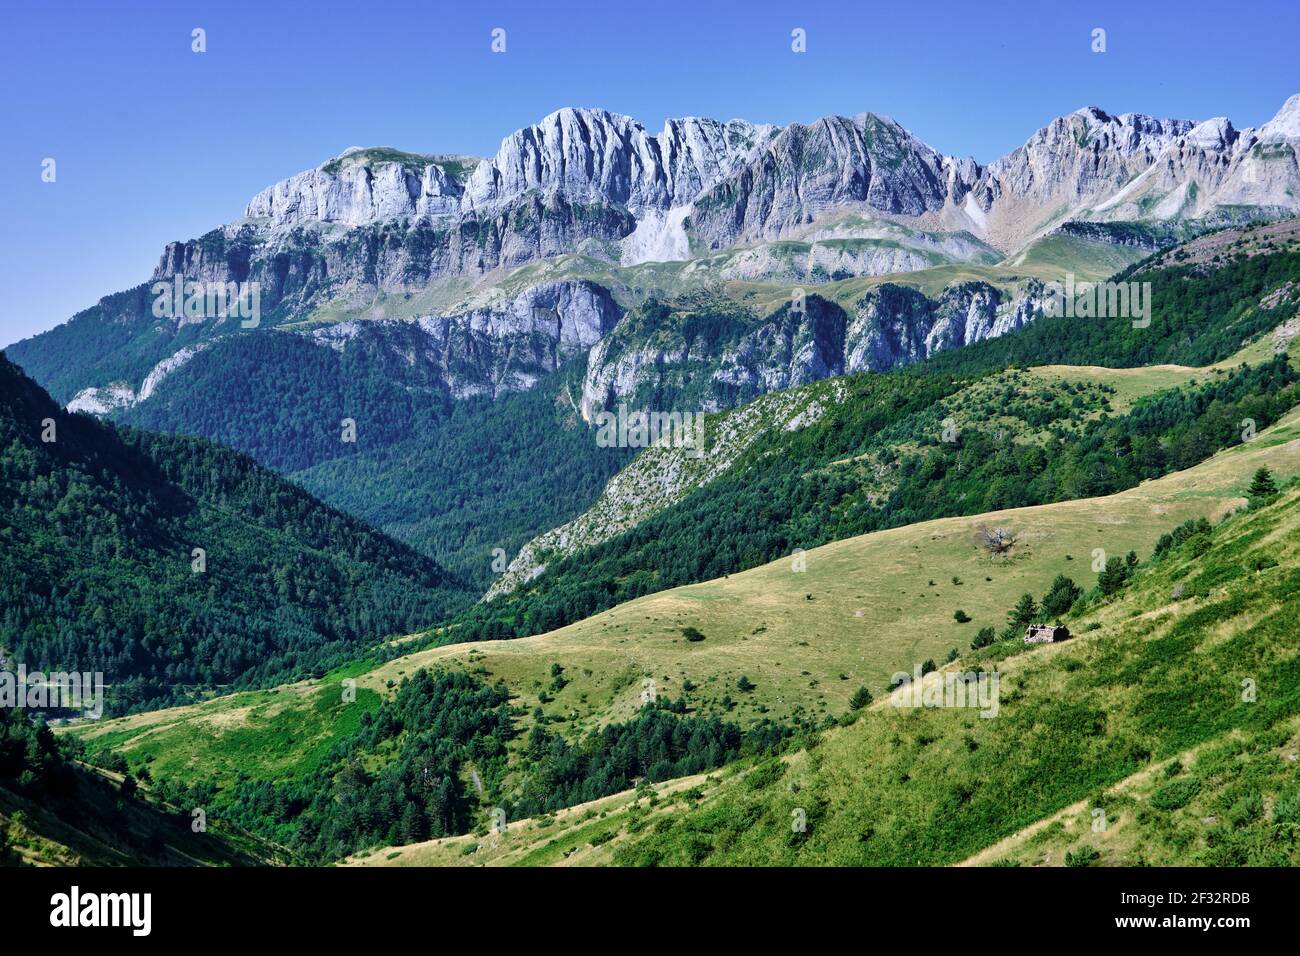 Mountains and grasslands landscape view. Stock Photo